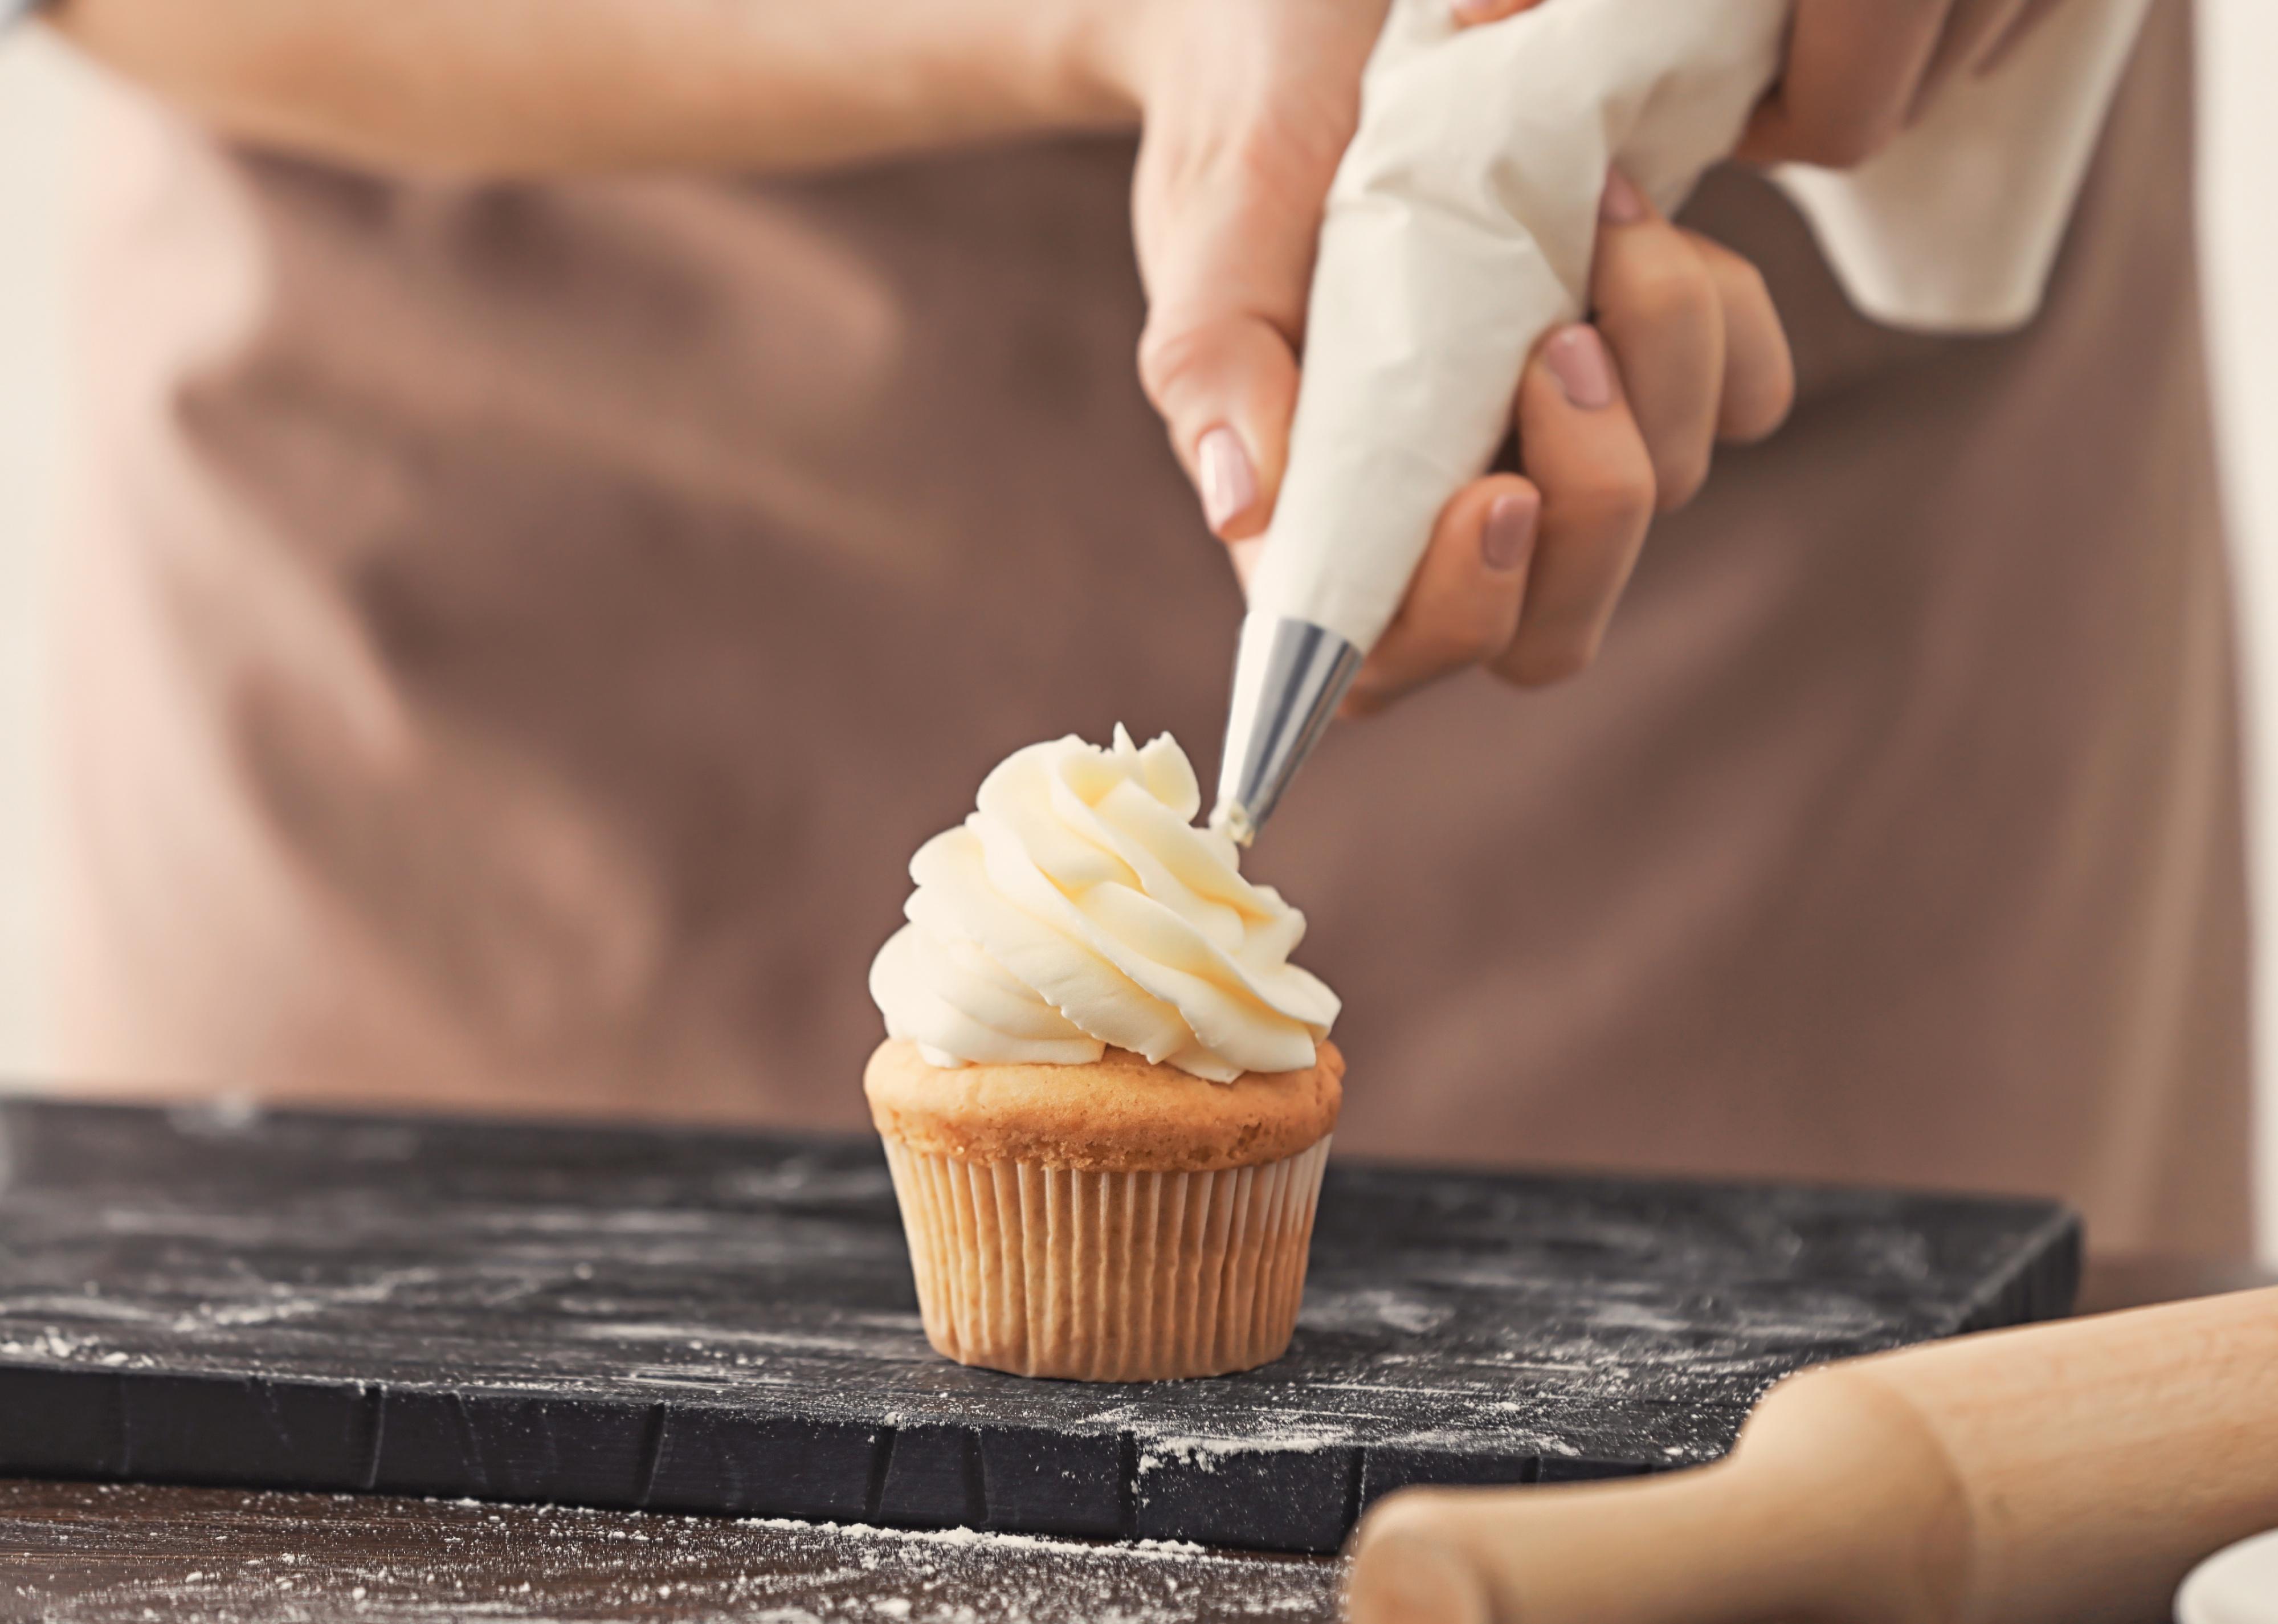 <p>Most Americans recognize either "frosting" or "icing," as the sweet stuff atop a cake, but the term <a href="https://www.insider.com/words-that-are-different-across-the-us#the-buttercream-topping-found-on-cupcakes-can-be-called-frosting-or-icing-12">frosting is slightly more common</a> on the Pacific coast, in the Northeast, and in the Midwest. Icing is so-called because of how sugar granules resemble ice pellets.</p>